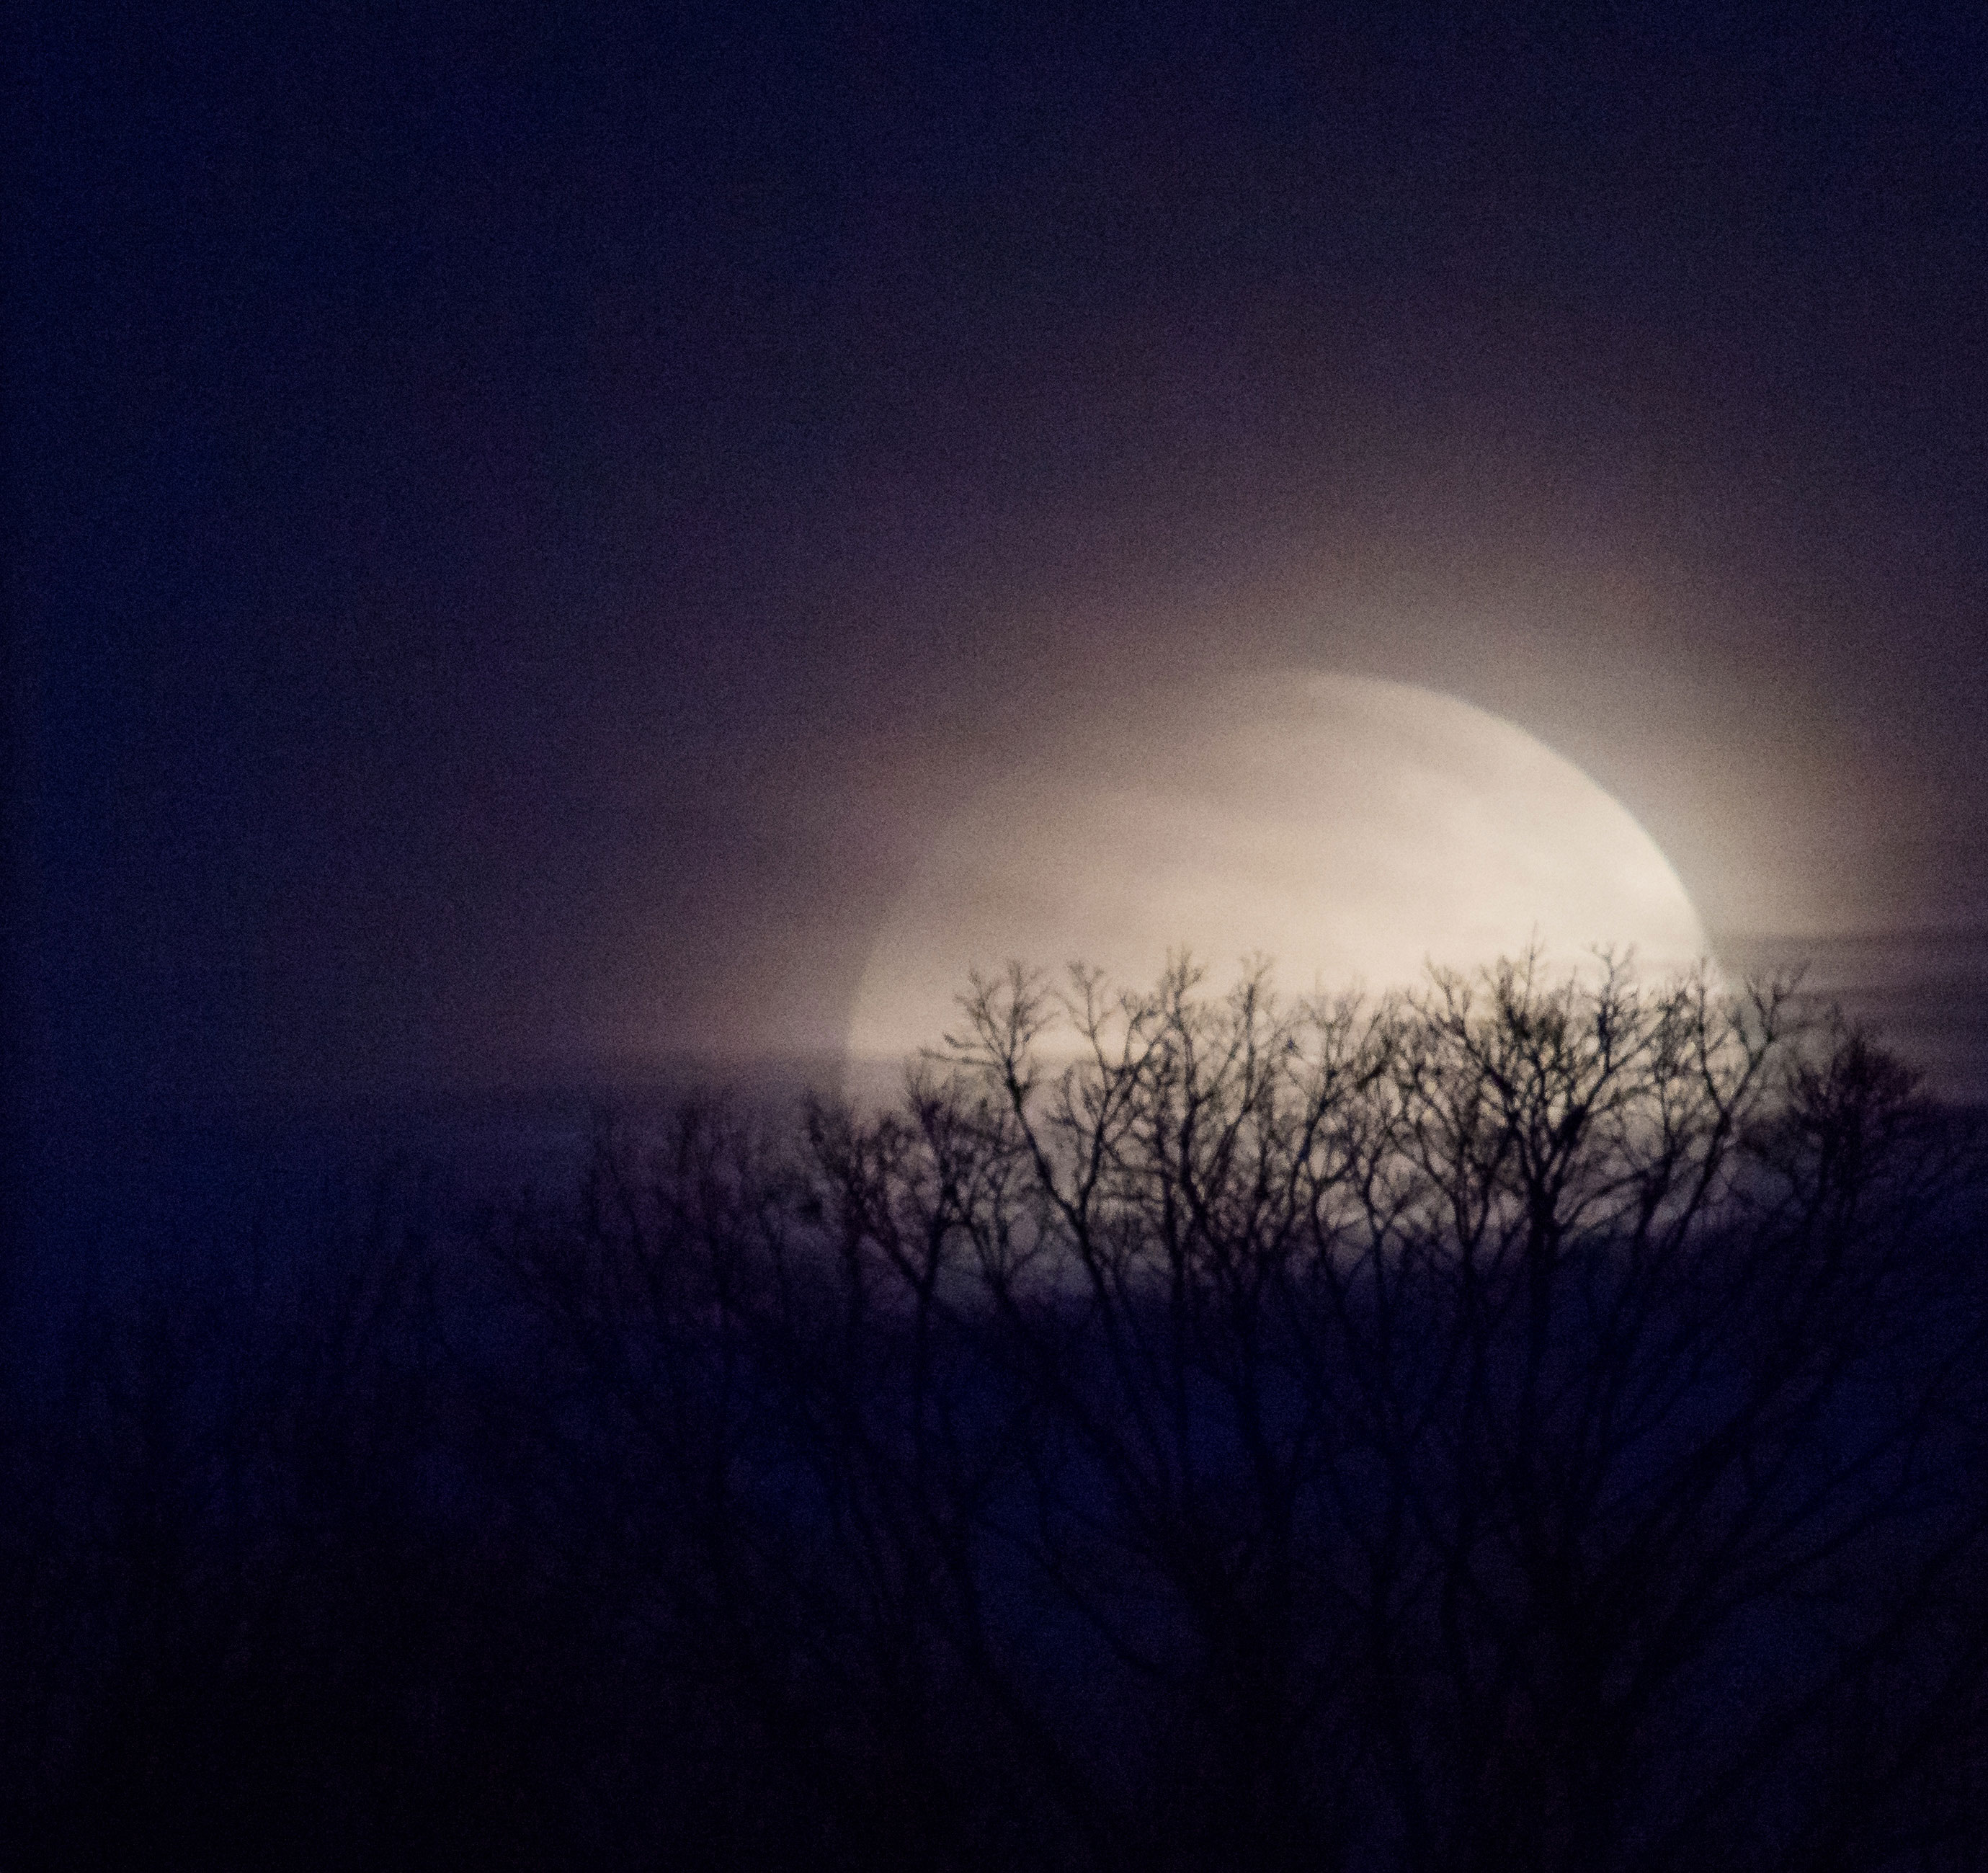 Wide, bright Moon, partially obscured by mist, rising behind leafless trees.oon rising over trees.